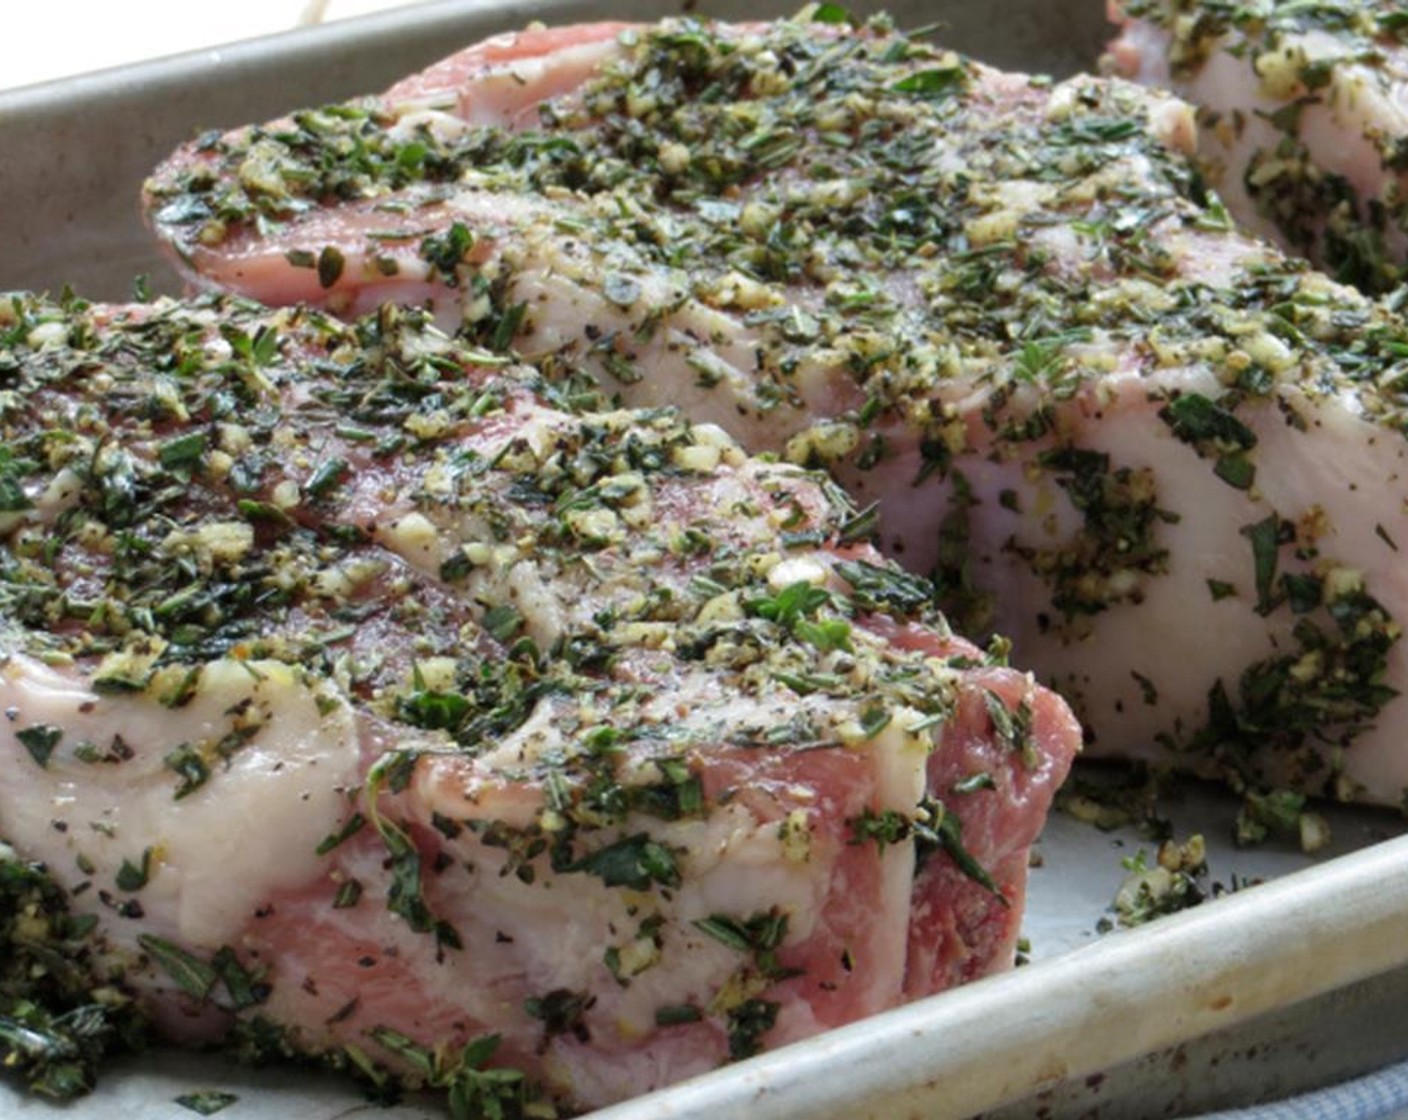 step 2 Place Veal Chops (2 lb) on a baking pan. Drizzle half the Olive Oil (1 Tbsp) over them. Sprinkle chops with half the herb mixture. Press herbs into the meat with your fingers, making sure they coat the chops. Turn chops over and repeat.